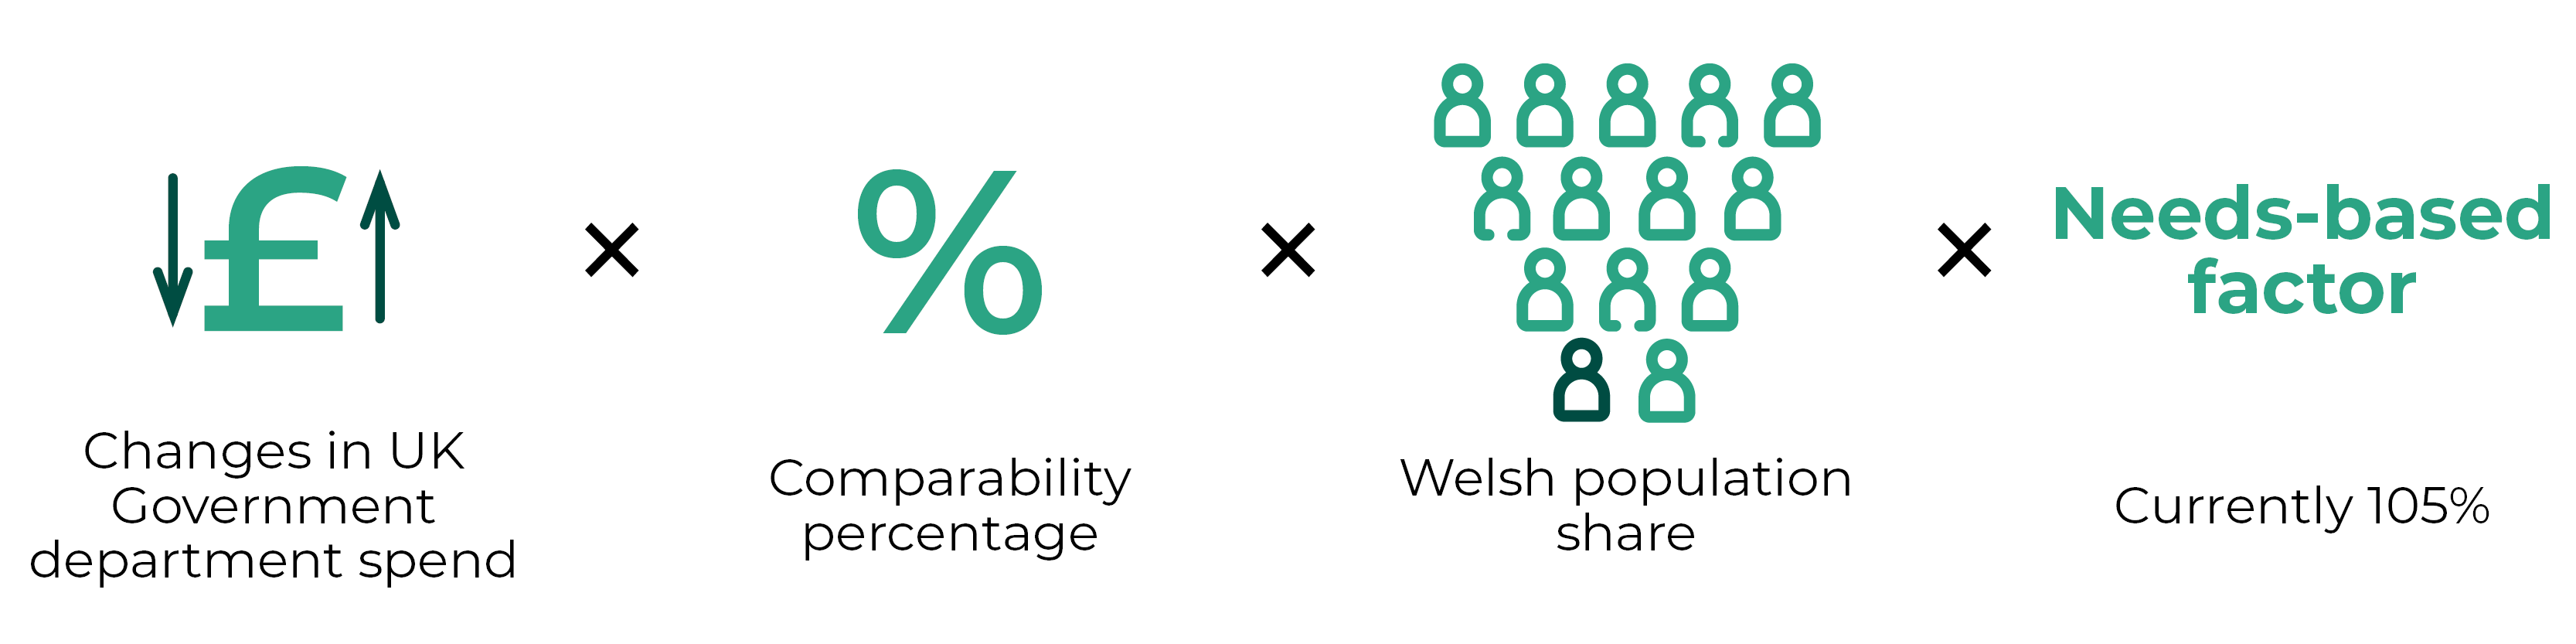 A graphic explaining how the Barnett formula operates. Changes in UK Government department spend, multiplied by a comparability percentage, multiplied by a Welsh population share, multiplied by a need-based factor.